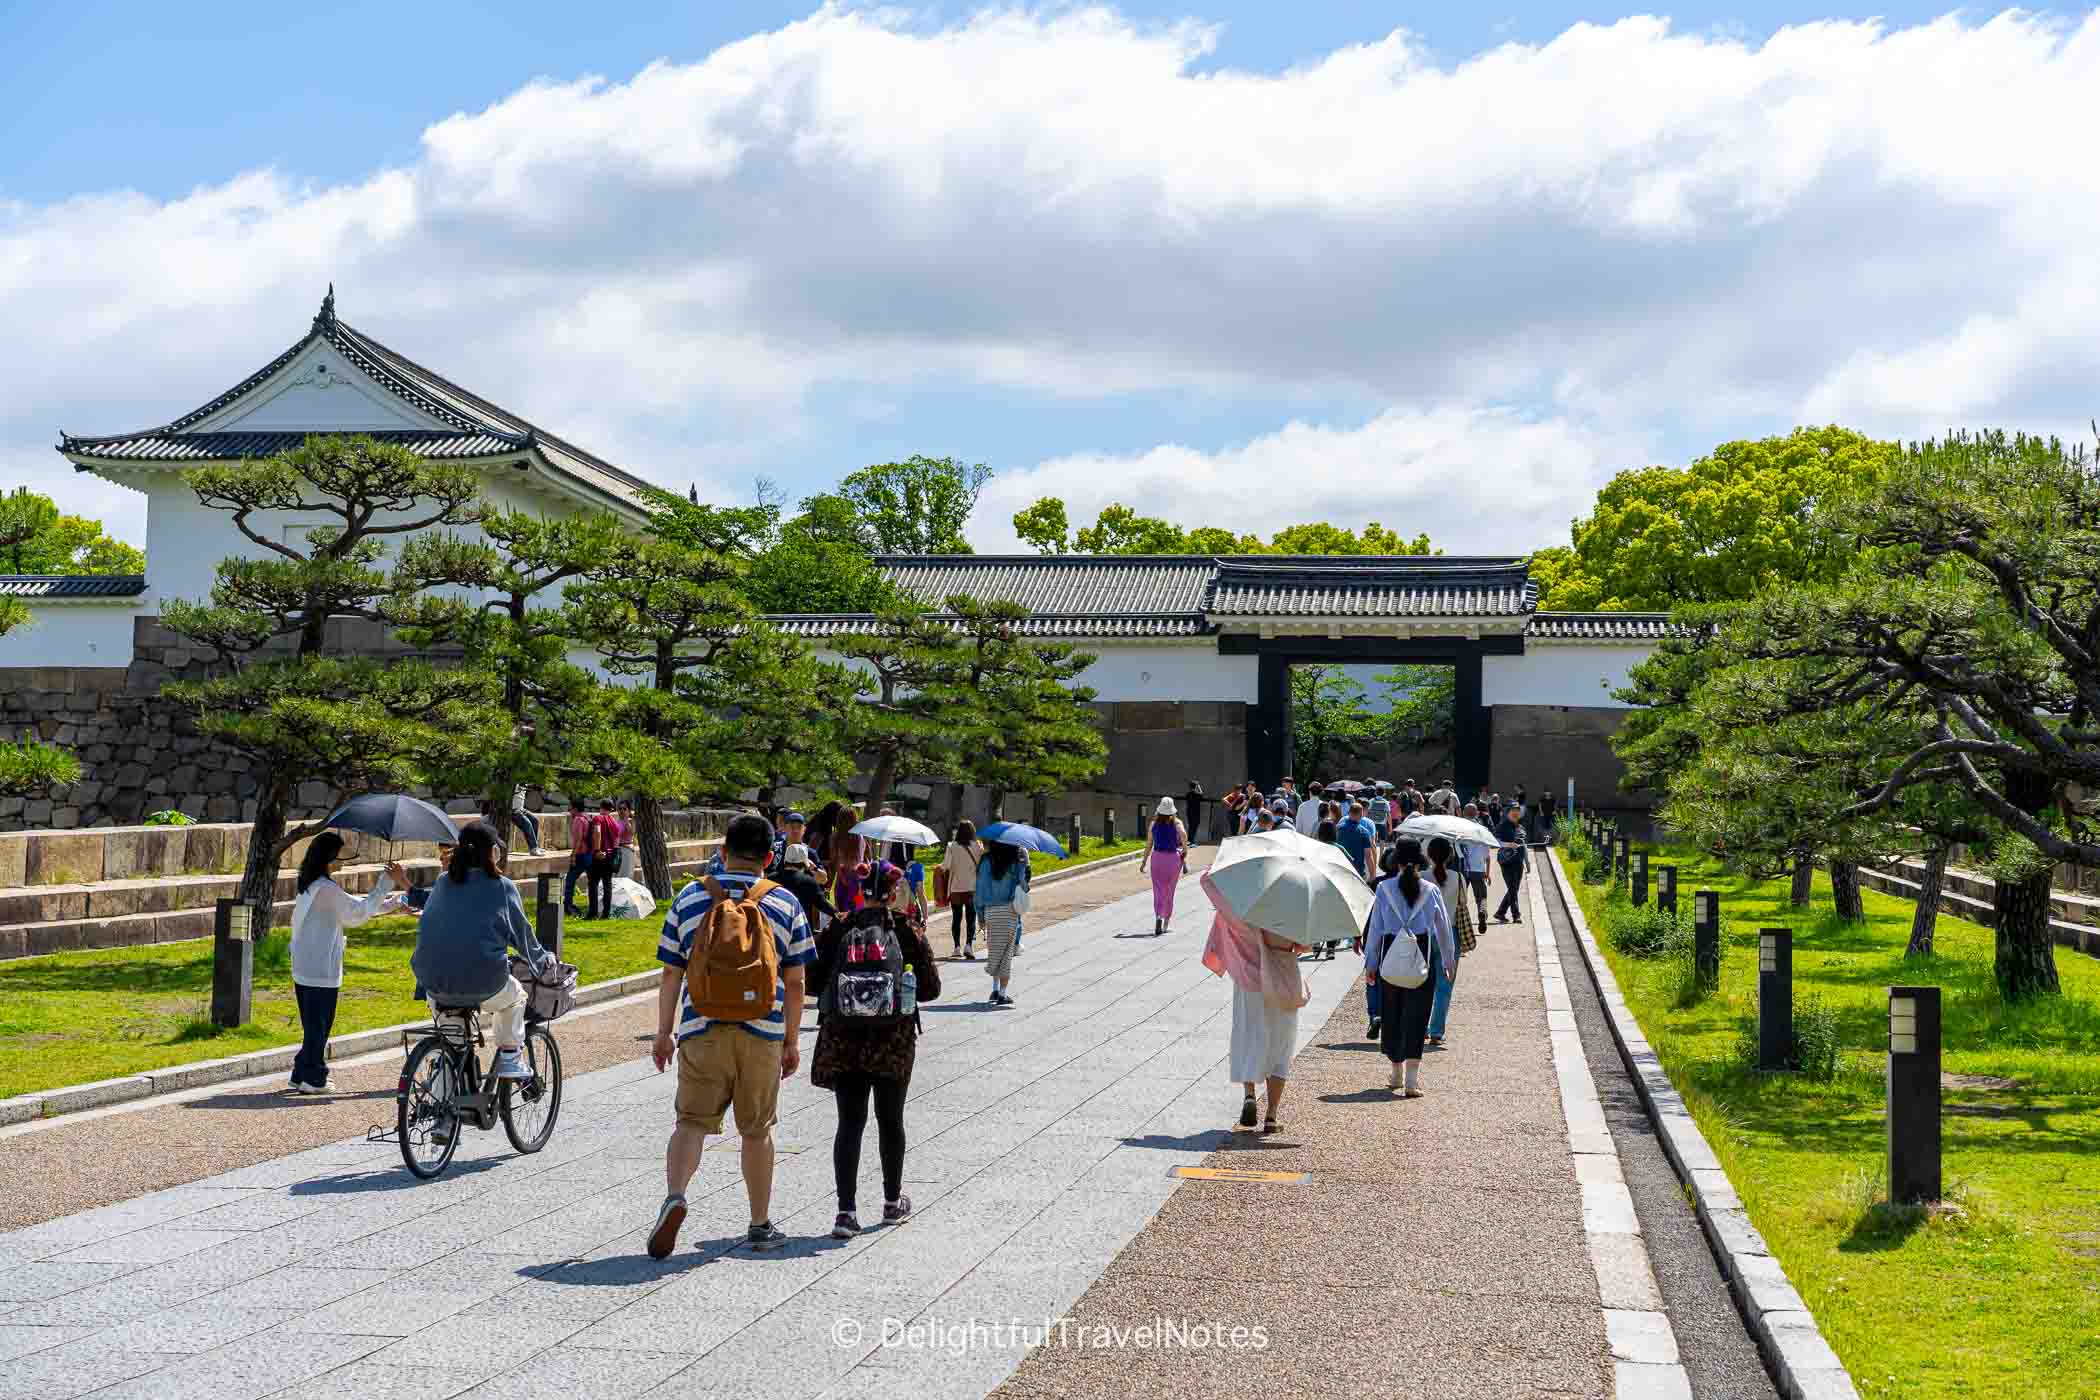 the walkway to Osaka Castle with many visitors.